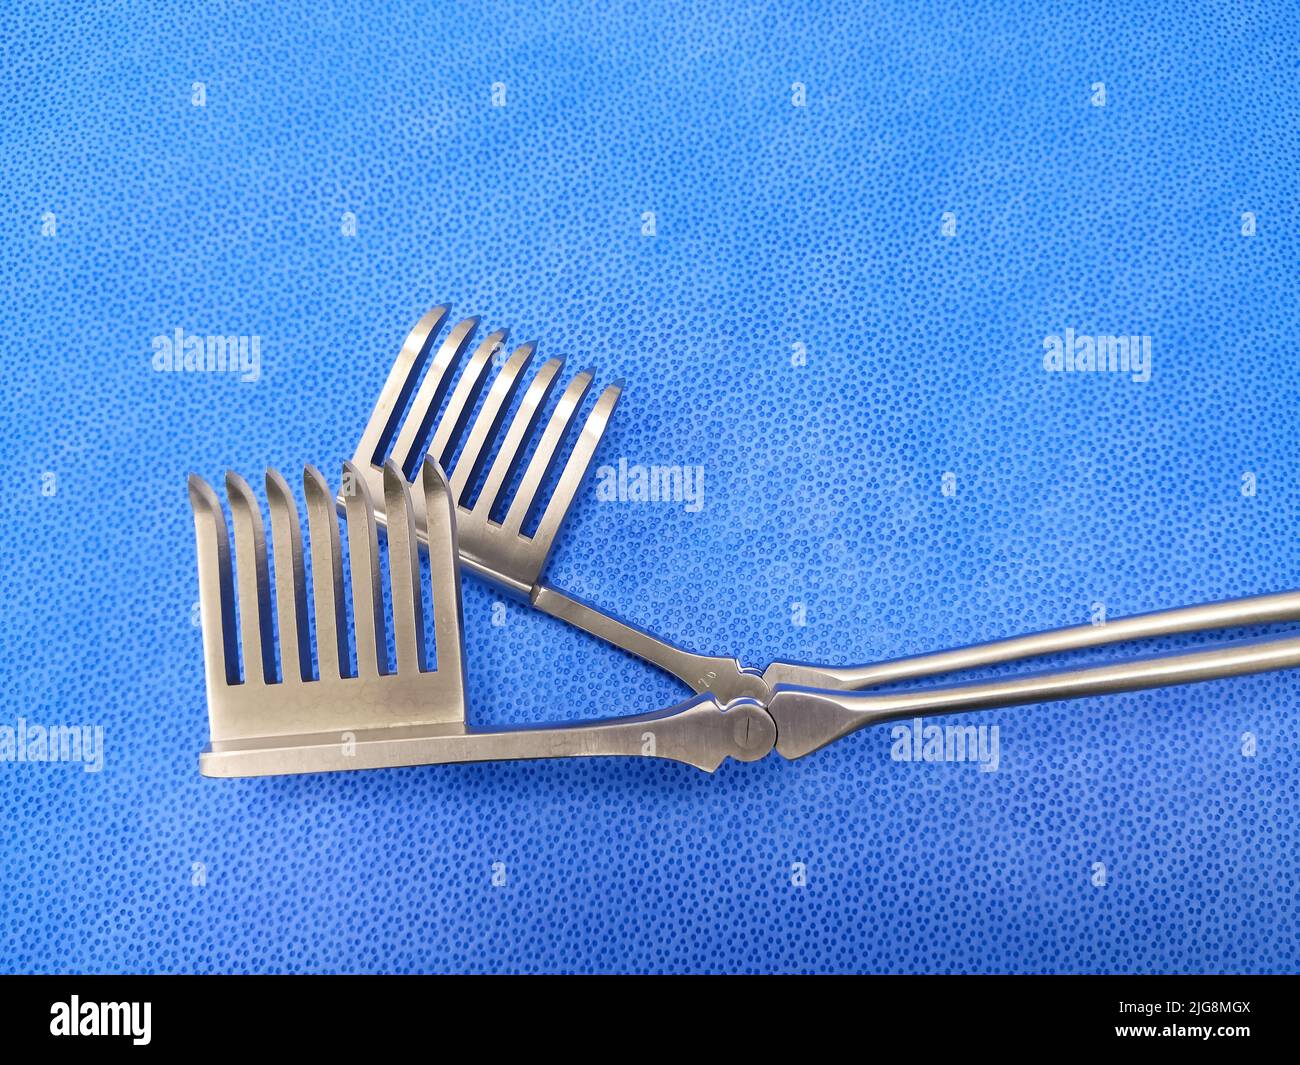 Closeup Image Of Medical Surgical Self Retractor Tip Stock Photo